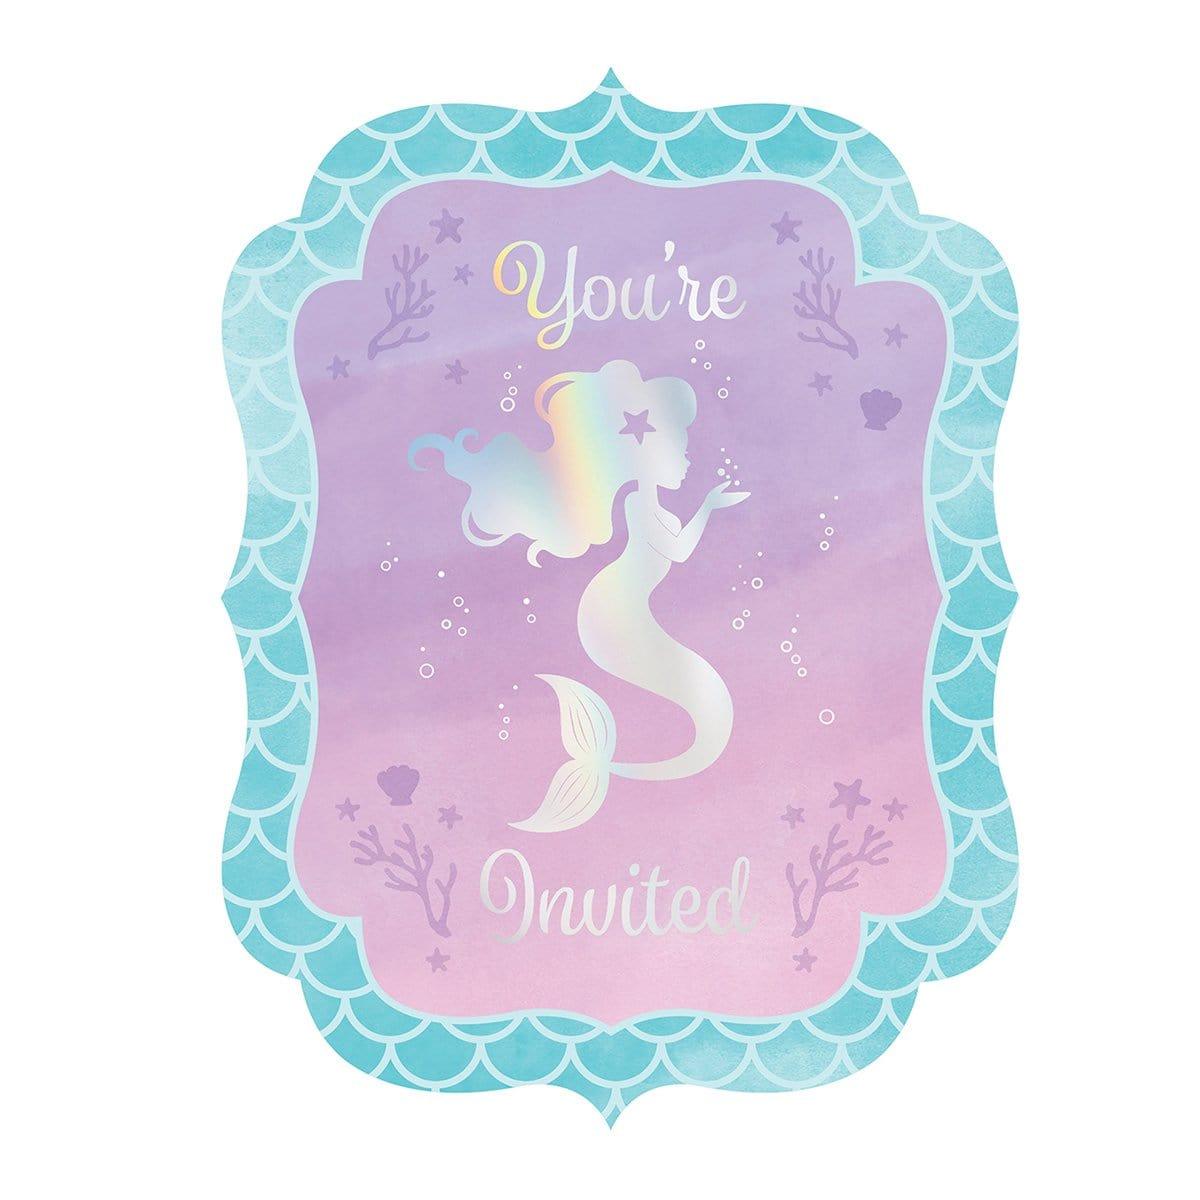 Buy Kids Birthday Mermaid Shine invitations, 8 per package sold at Party Expert